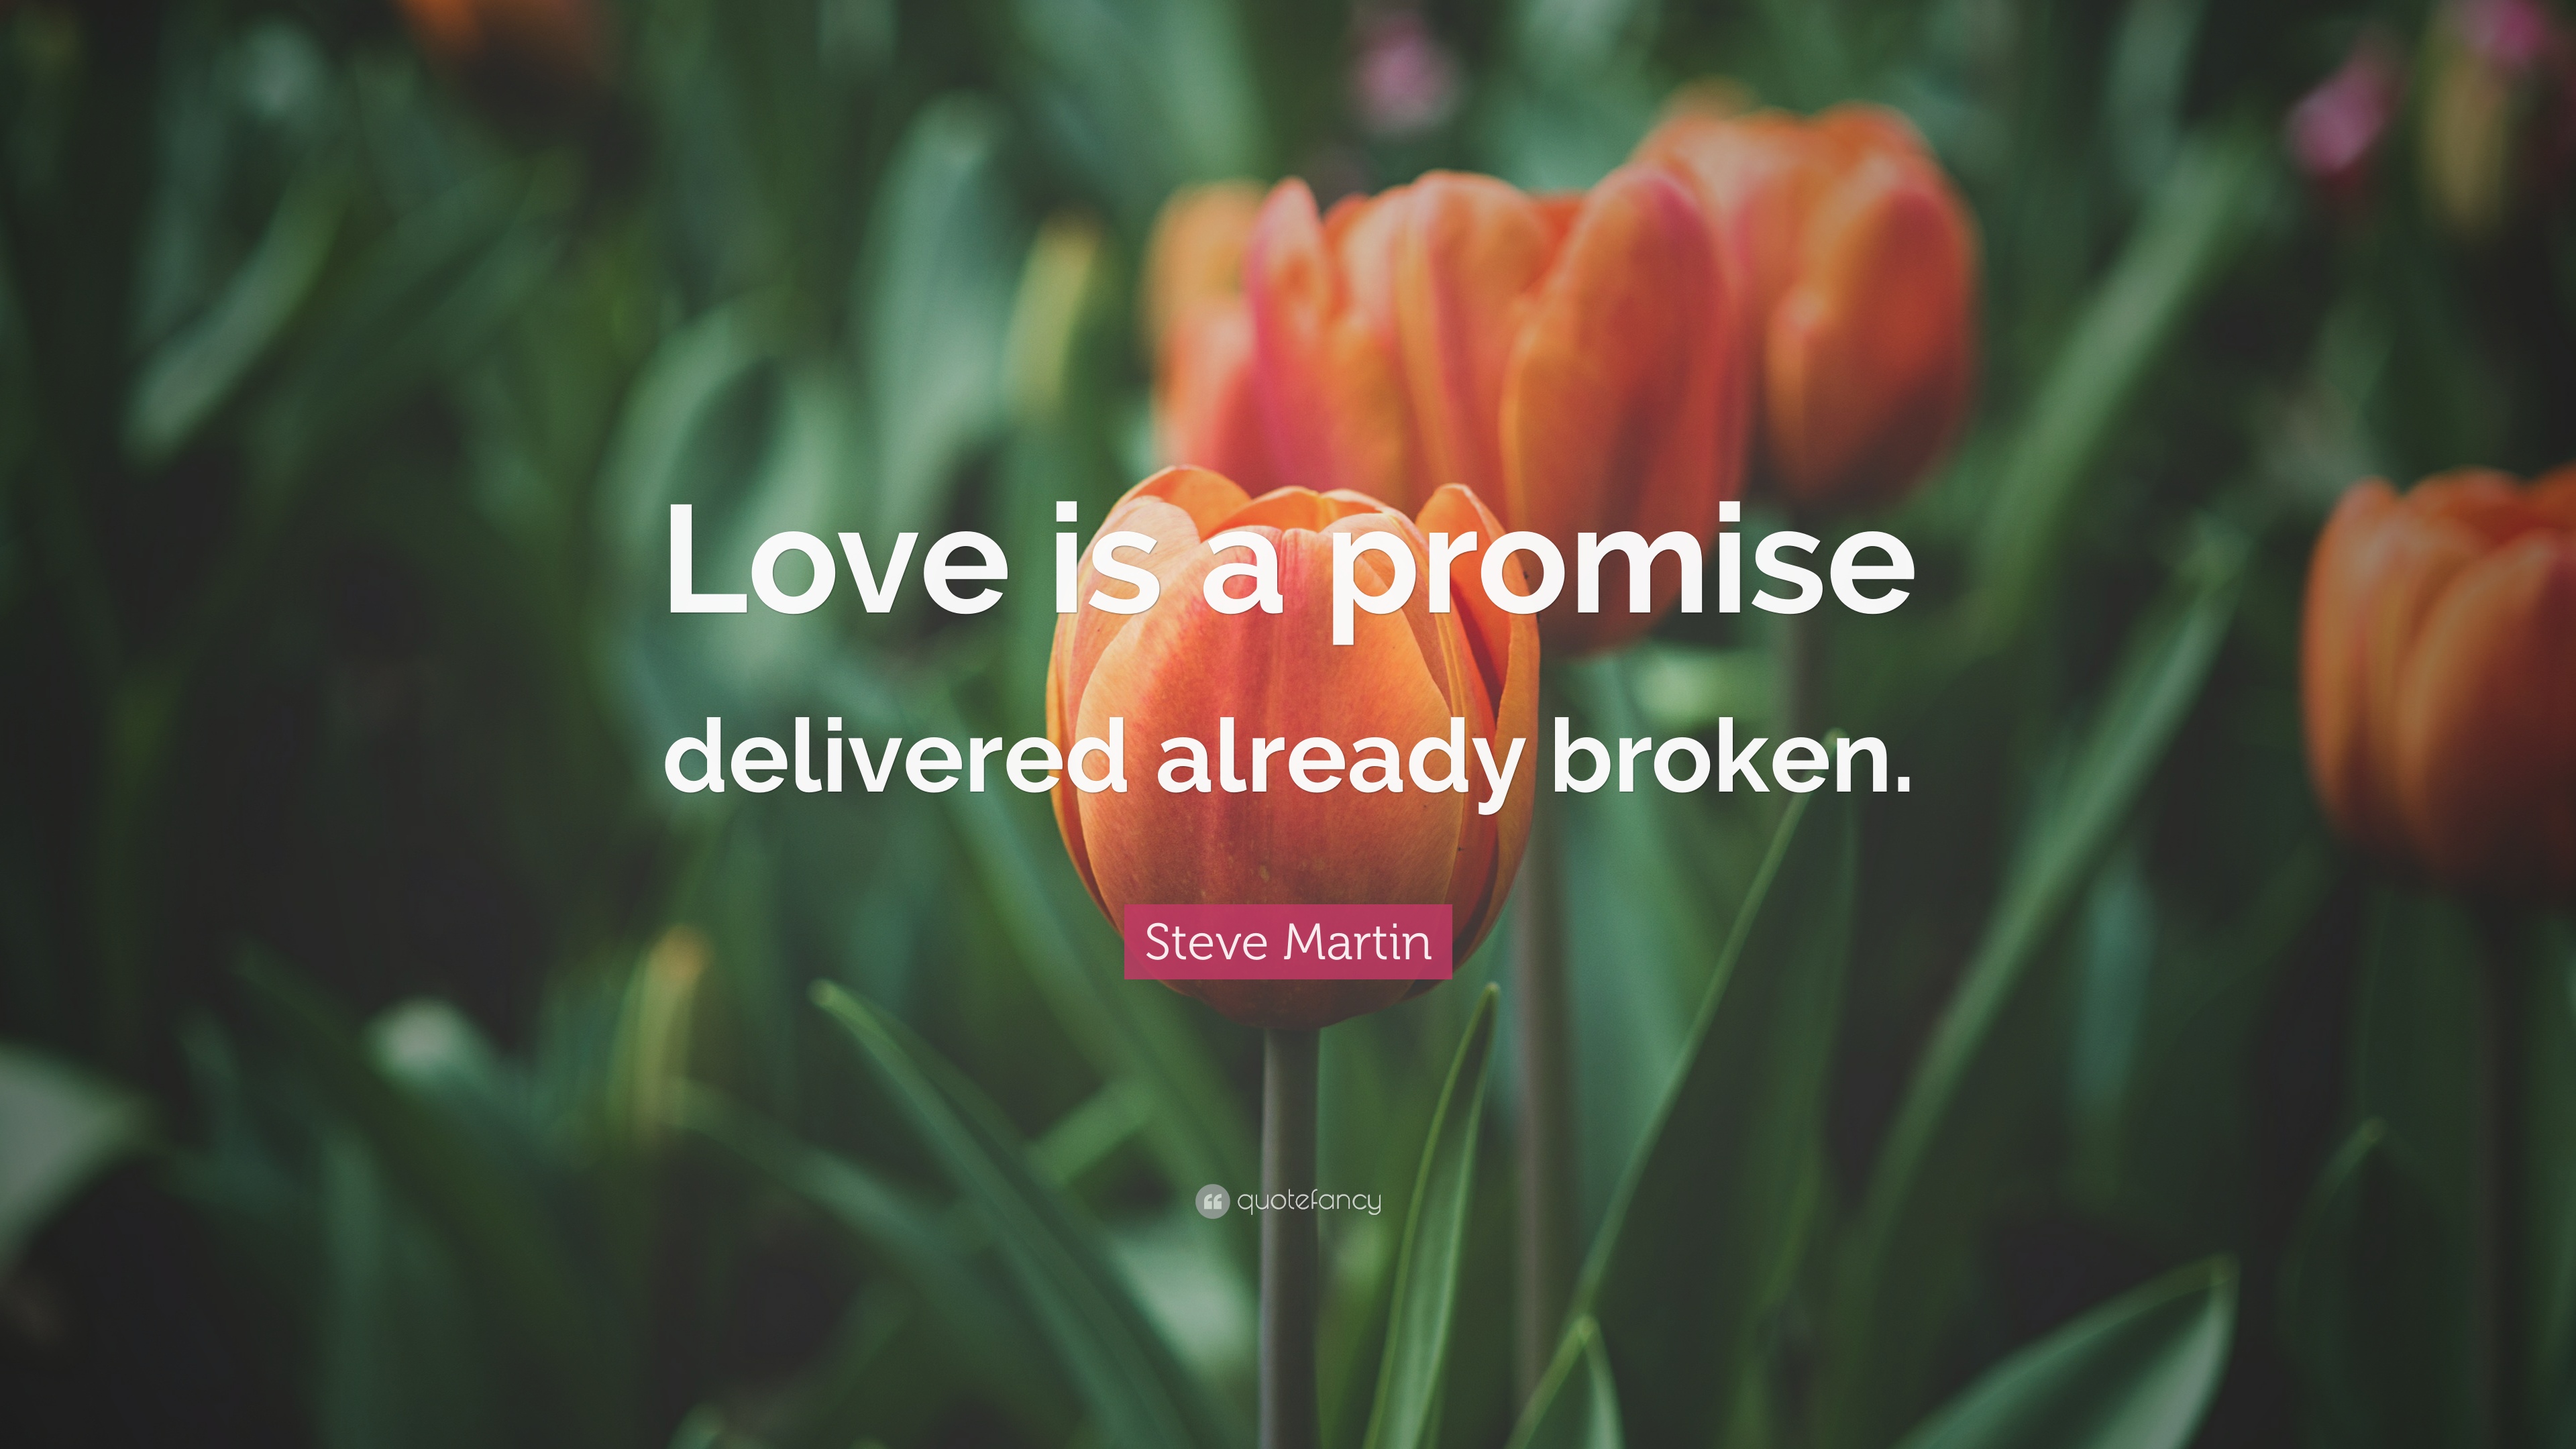 Steve Martin Quote - Orhan Pamuk Love Quotes - HD Wallpaper 